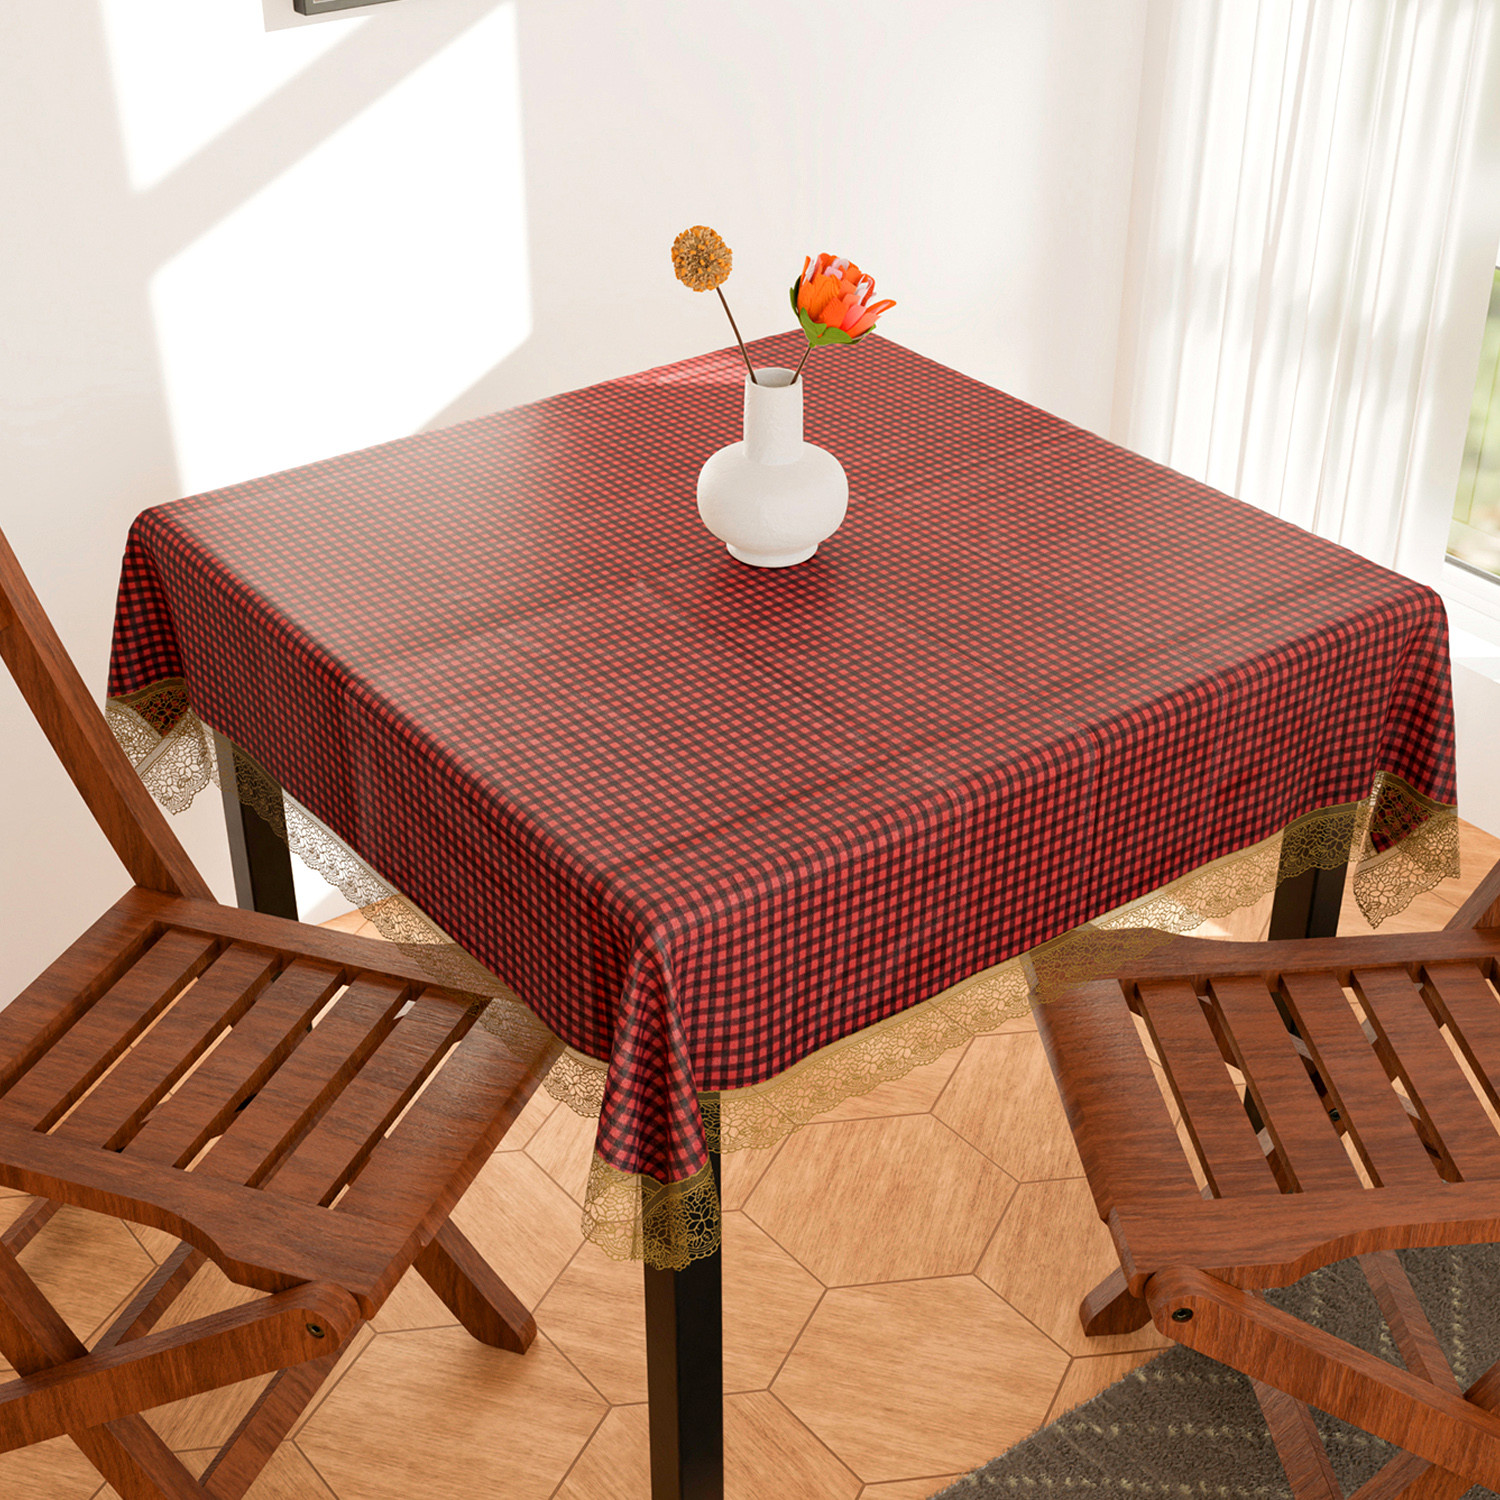 Kuber Industries Square Table Cover for 4 Seater|PVC Waterproof Check Pattern Tablecloth Indoor & Outdoor|48x48 Inch (Red)